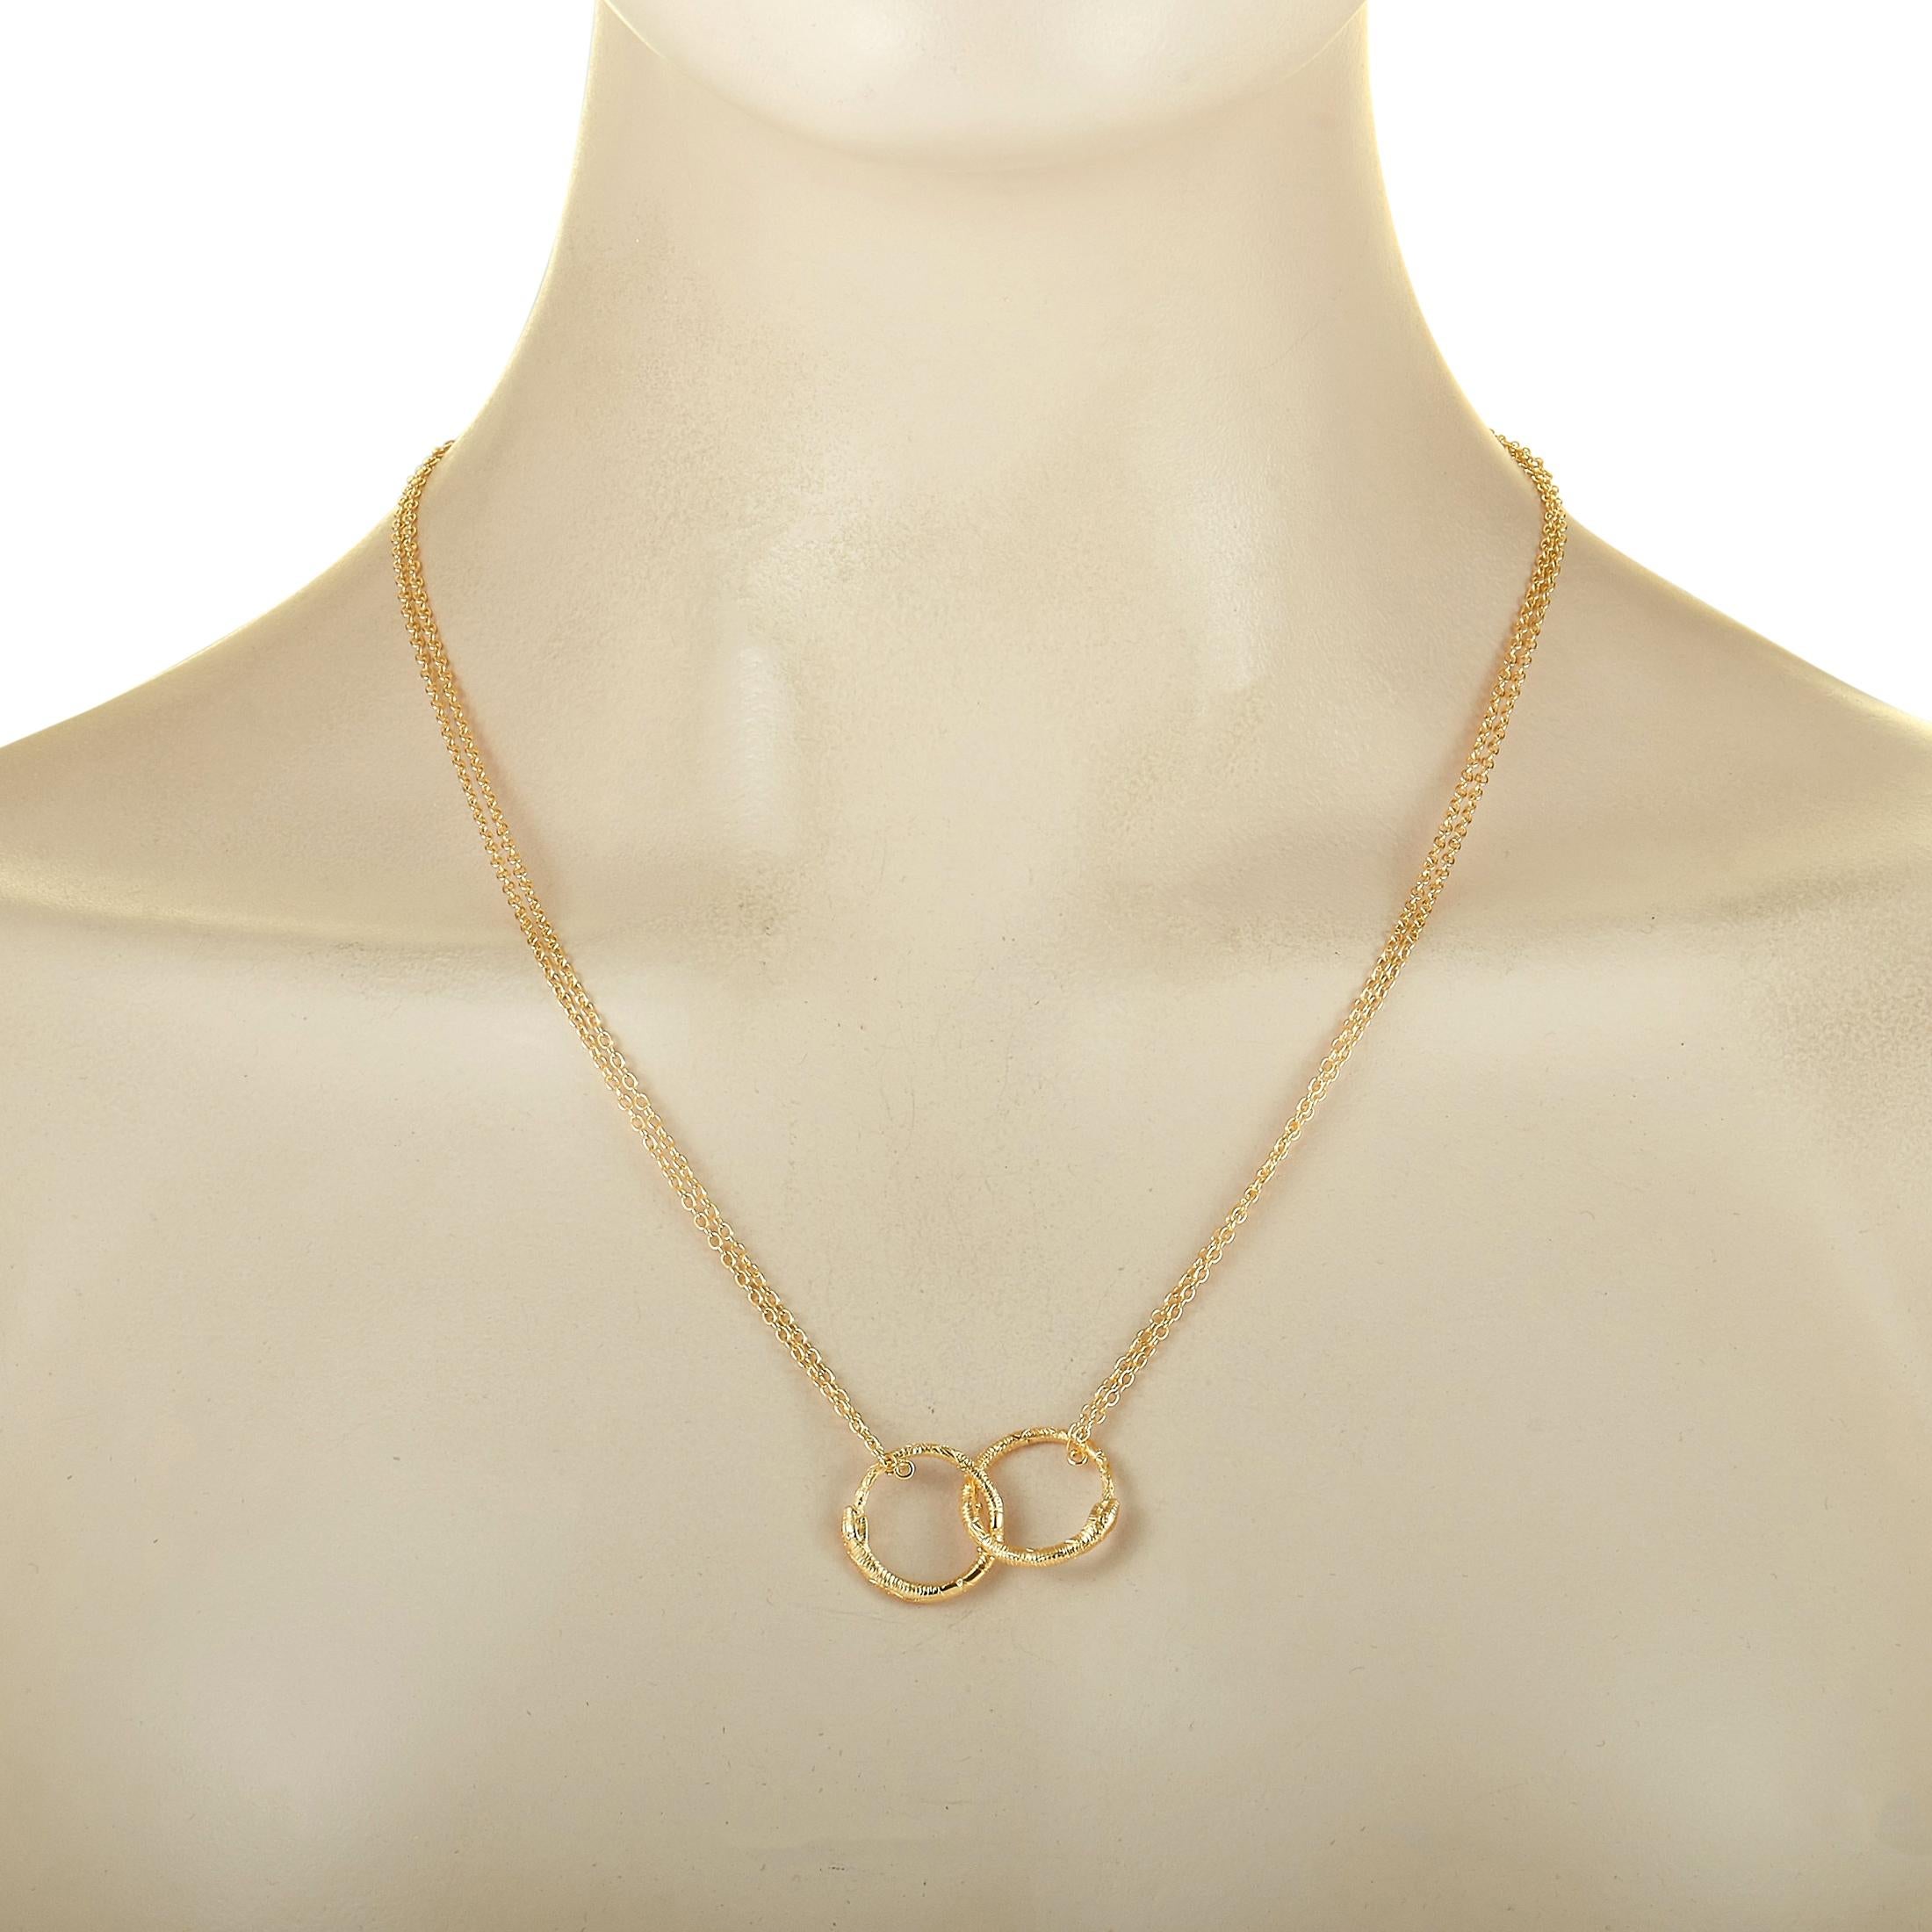 The Gucci “Ouroboros” necklace is crafted from 18K yellow gold and weighs 12 grams. The necklace measures 21” in length and boasts a 0.70” by 0.70” pendant that doubles as a clasp.
 
 This jewelry piece is offered in brand new condition and includes